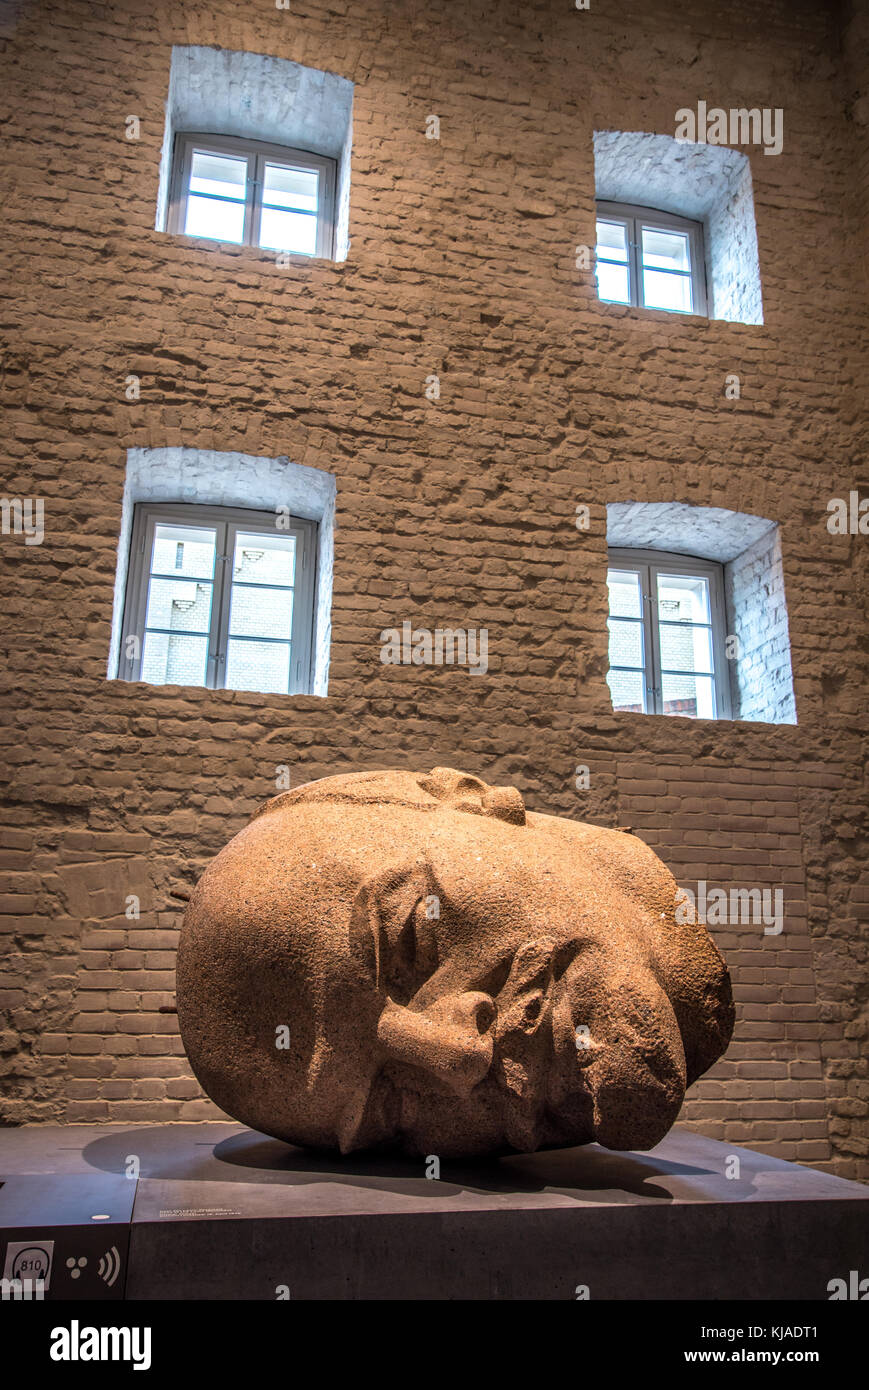 Head of Lenin statue on display in Berlin museum of disgraced historic monuments Stock Photo